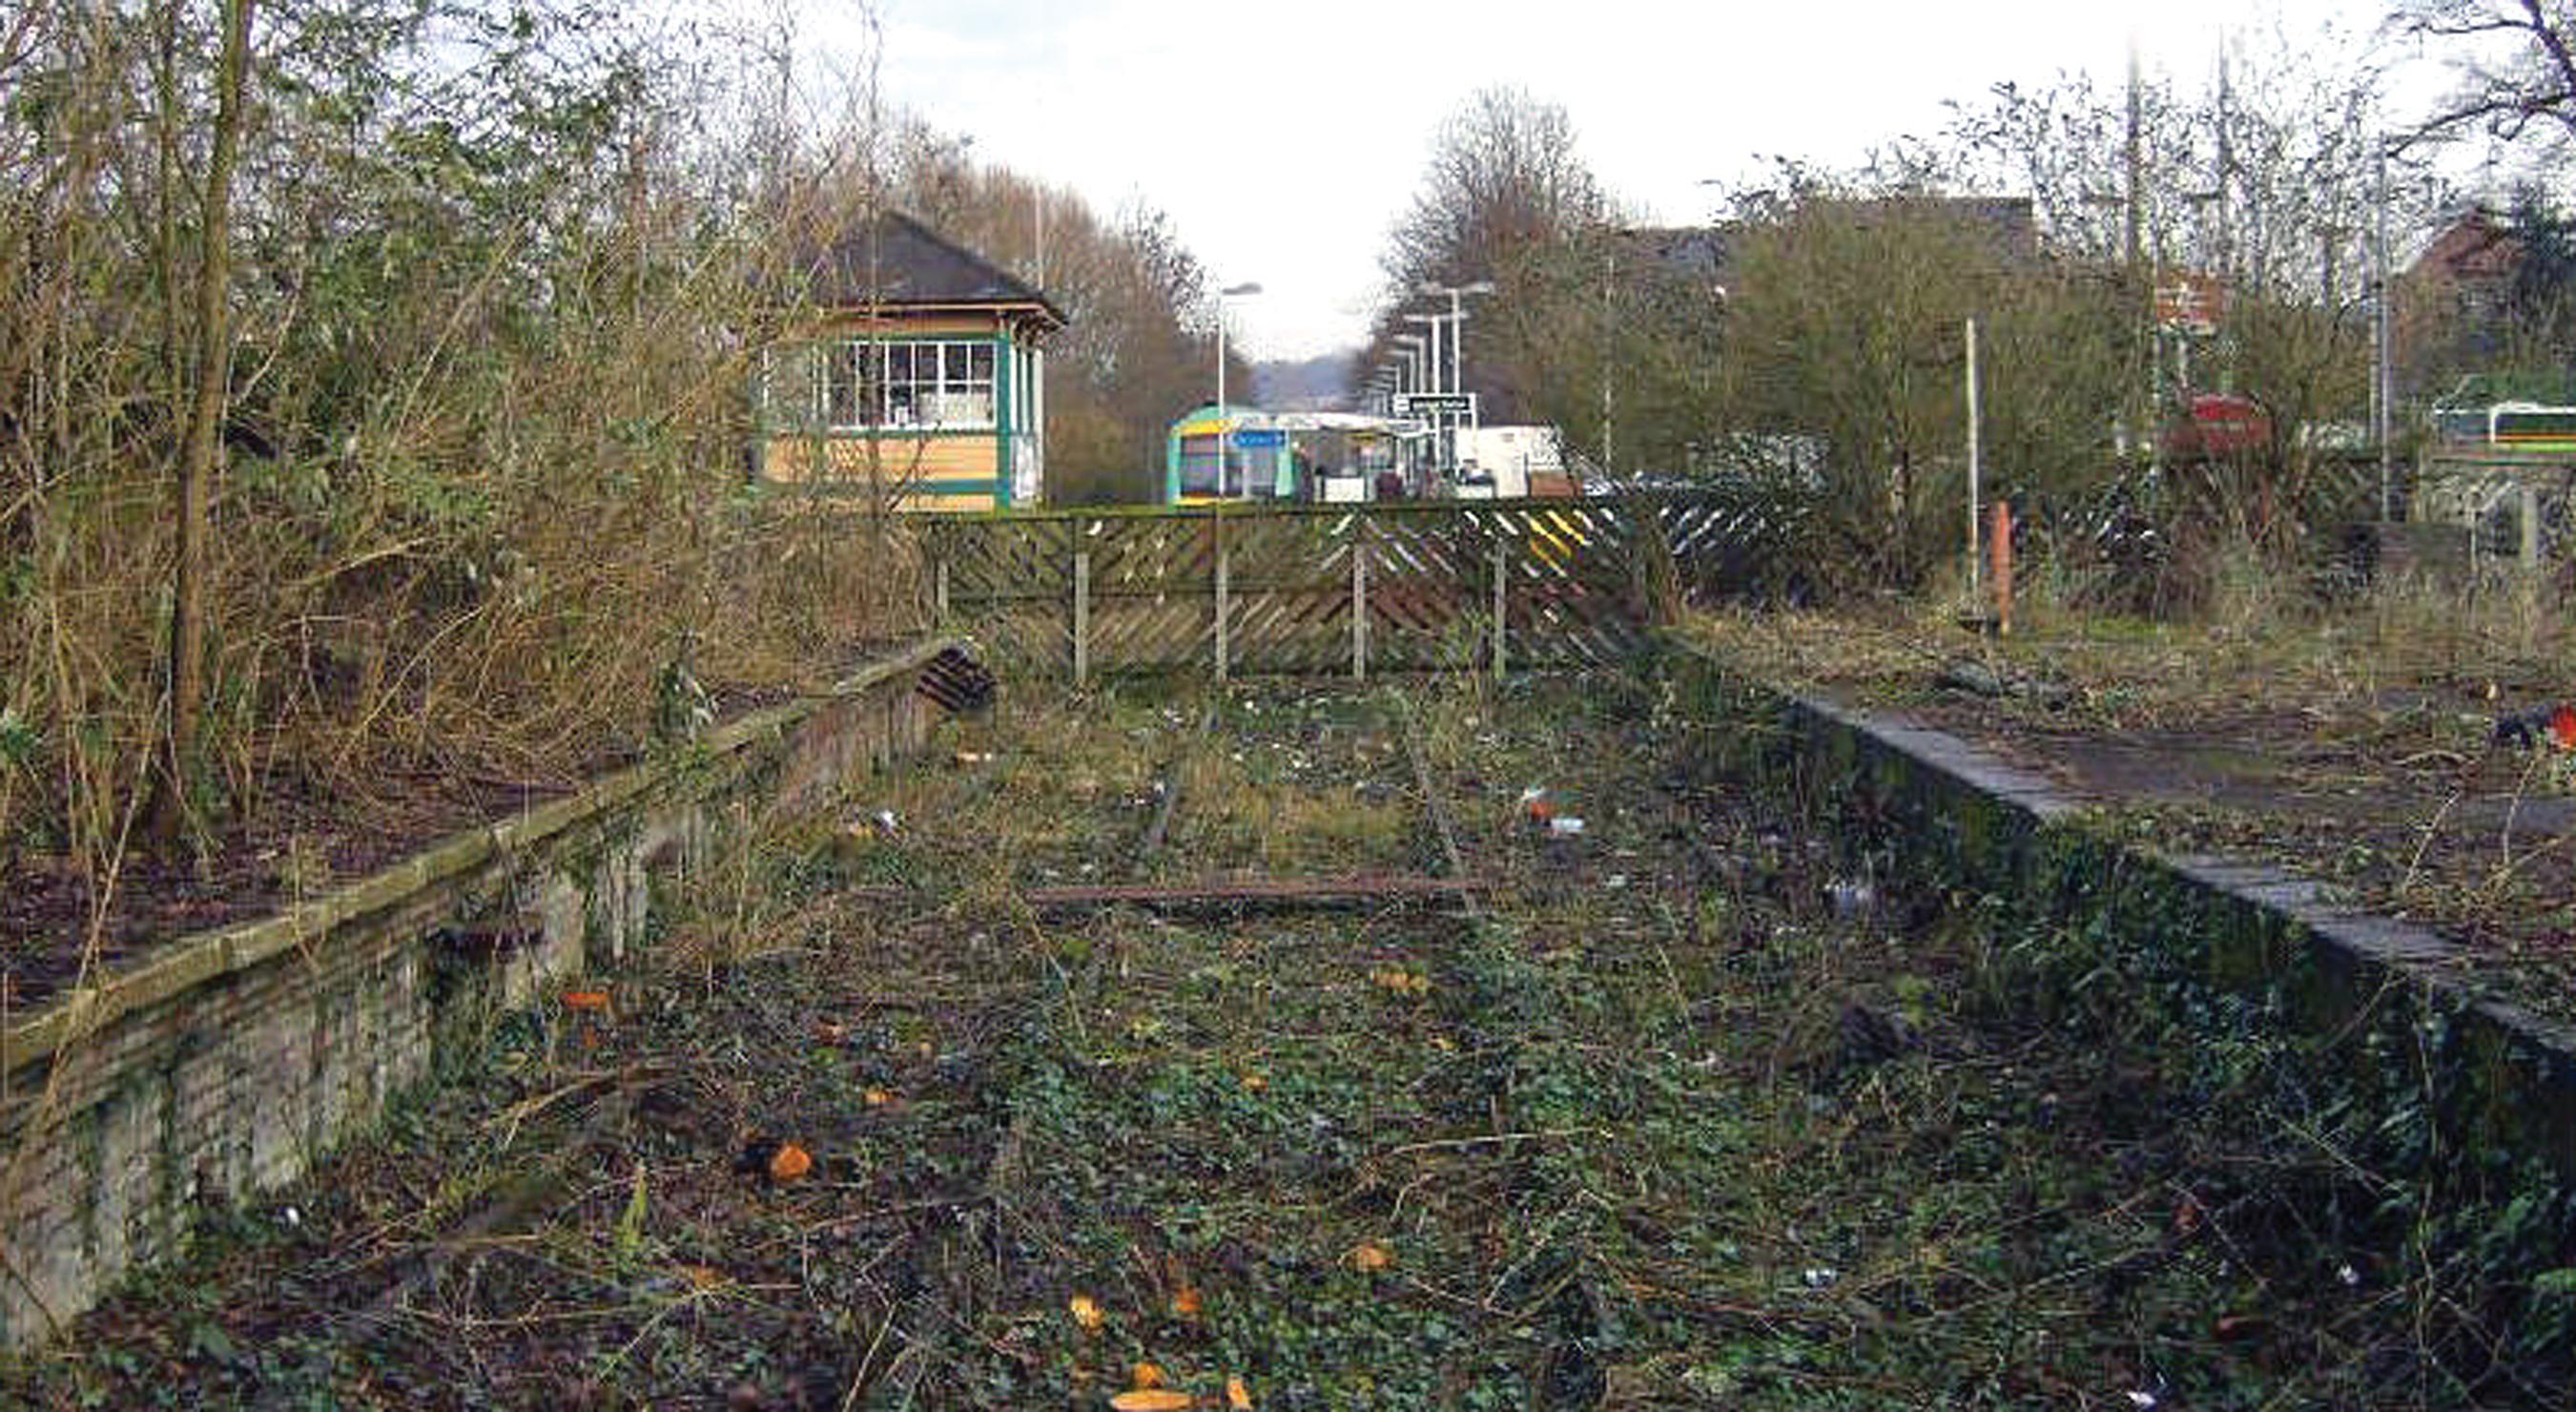 Uckfield: the line to Lewes  closed in 1969